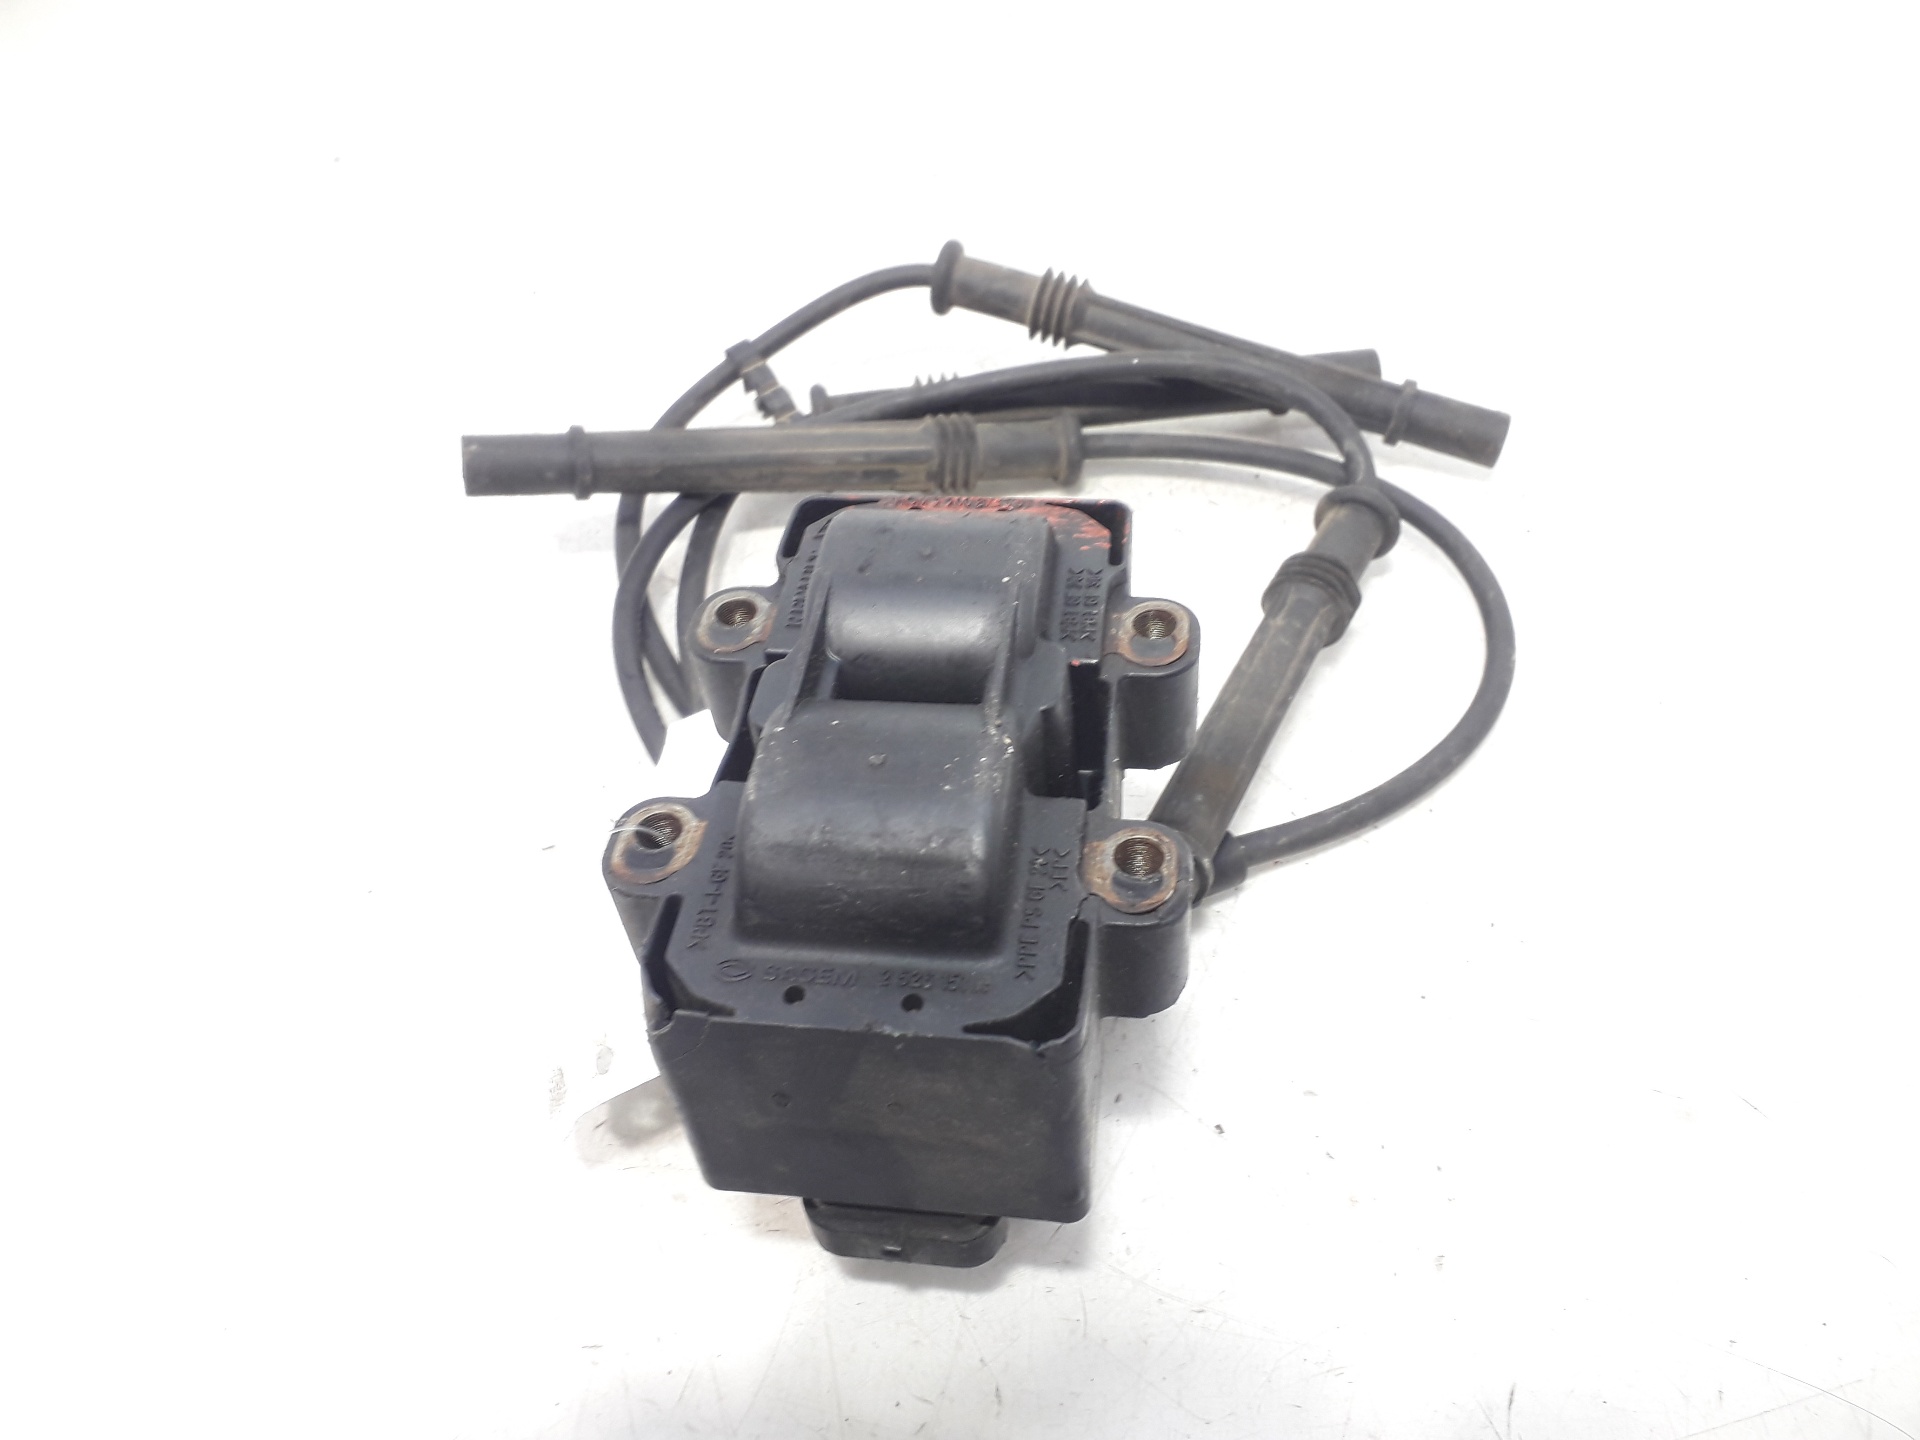 RENAULT Clio 2 generation (1998-2013) High Voltage Ignition Coil 7700274008 18762928